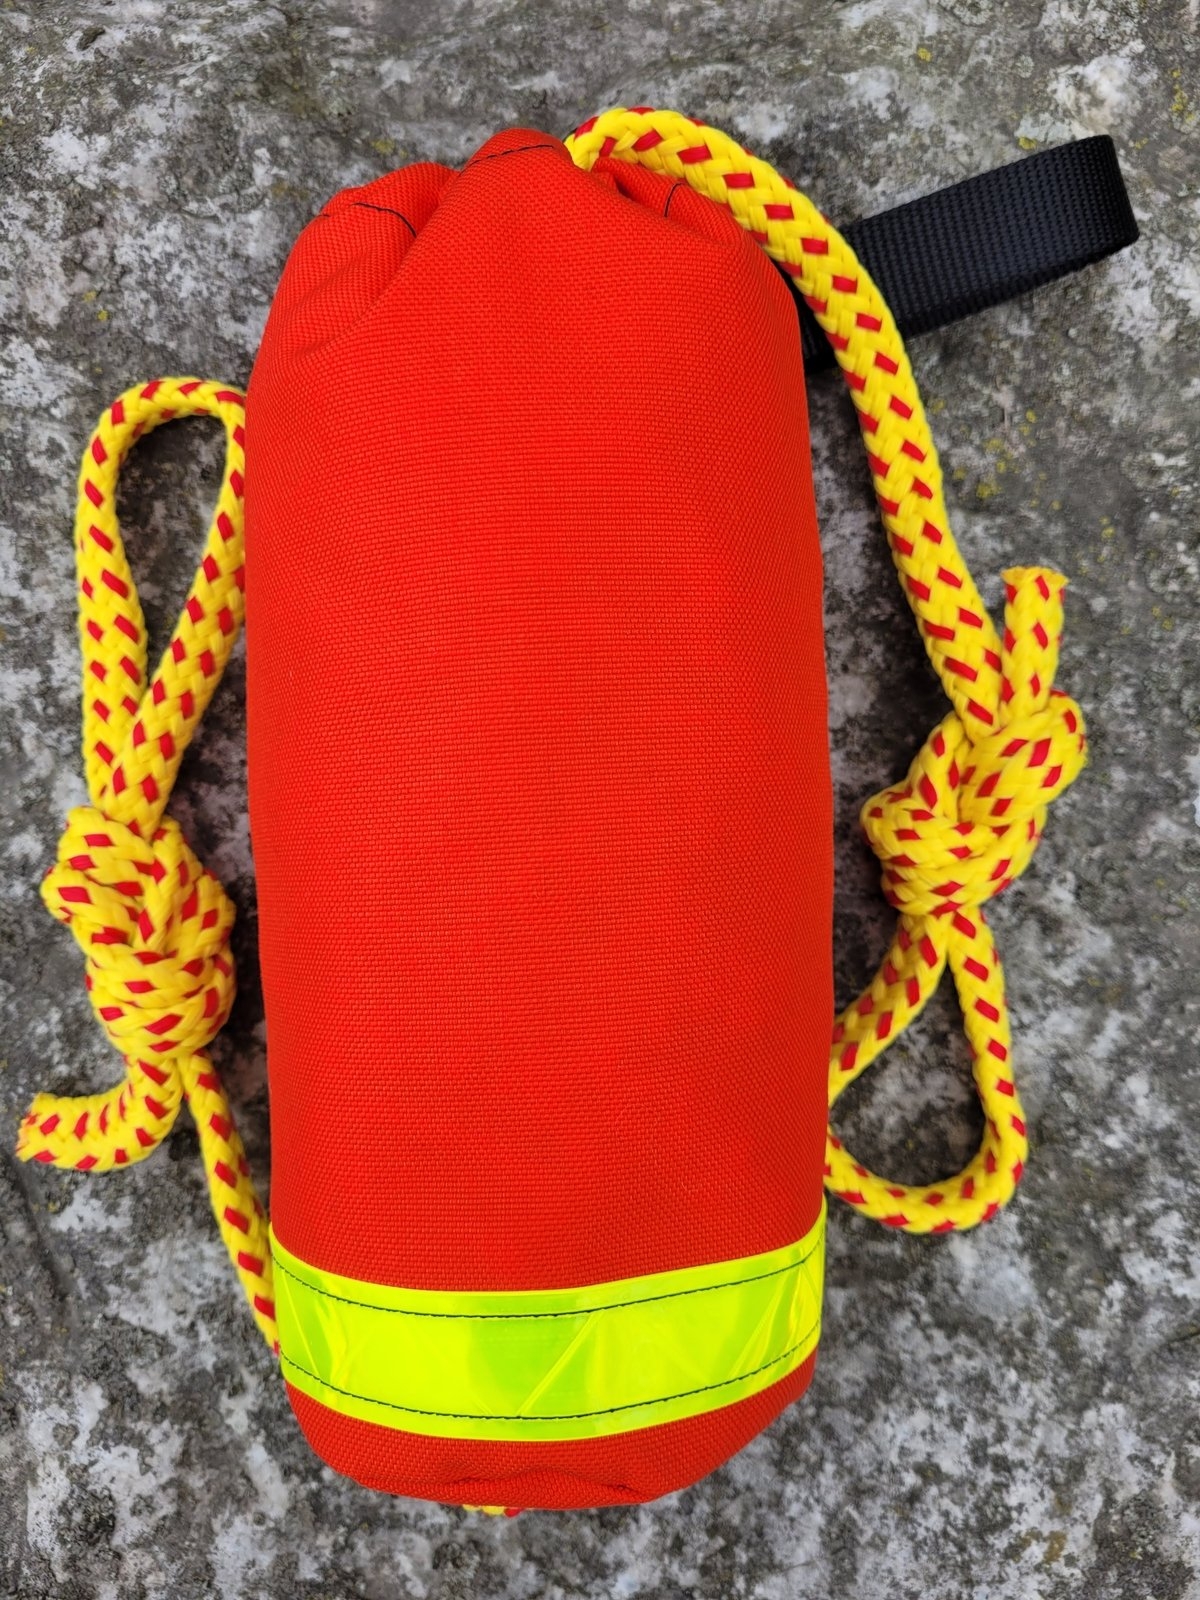 Maple Leaf Ropes Water Rescue Throw Bag